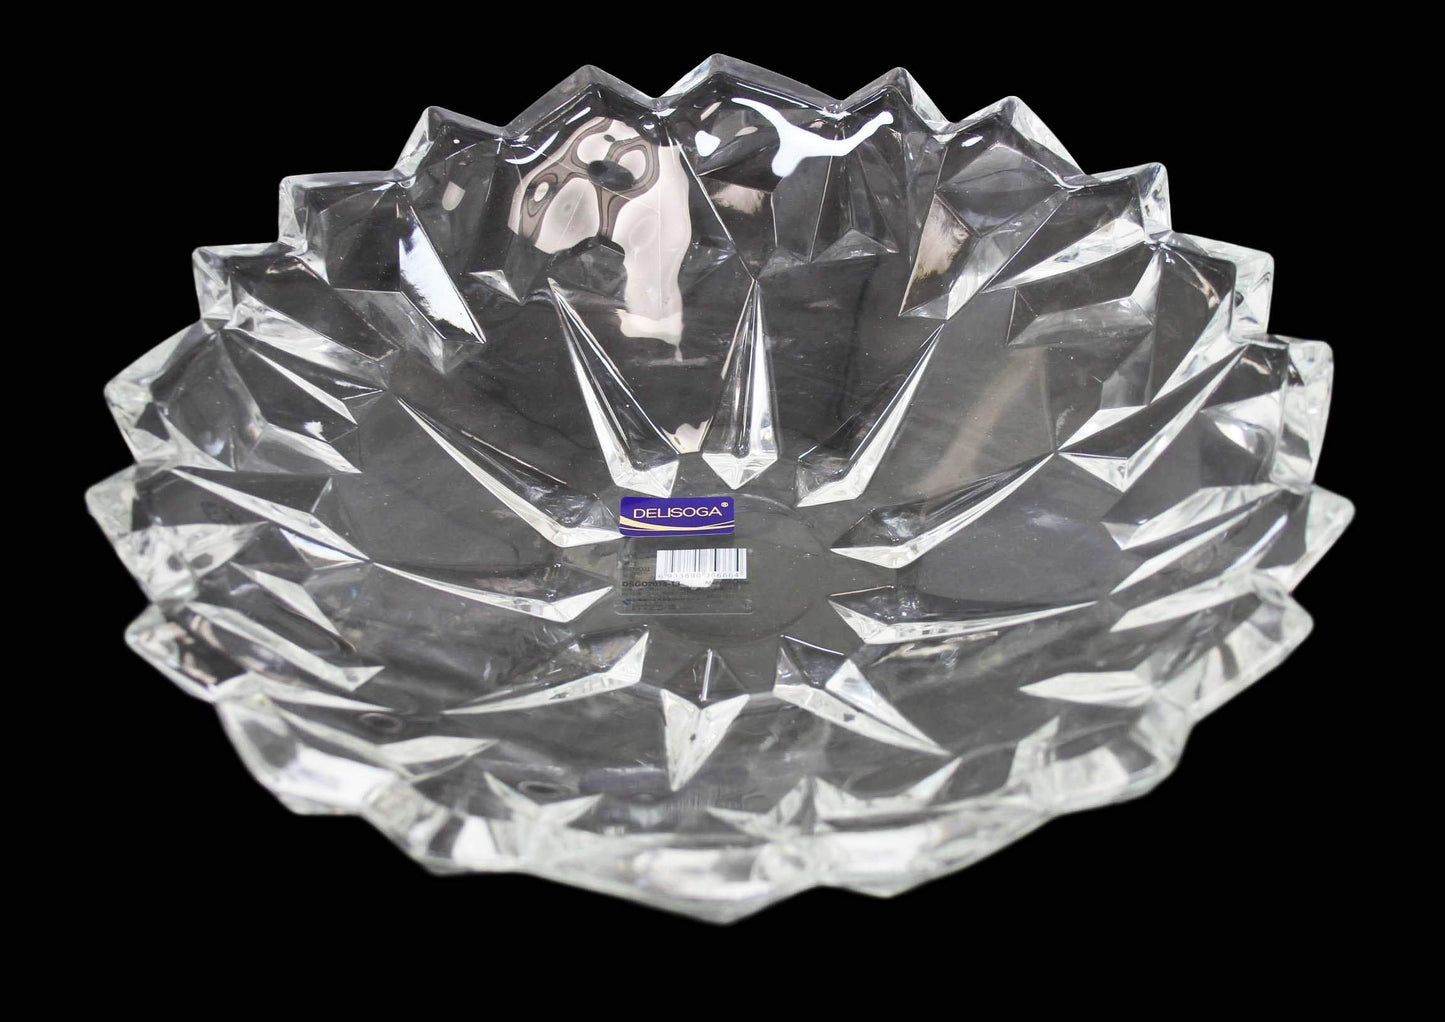 Deep Serving Glass Aesthetic Durable Party Wedding Serving Gift Glass Tray 33cm DL0006 (Parcel Rate)